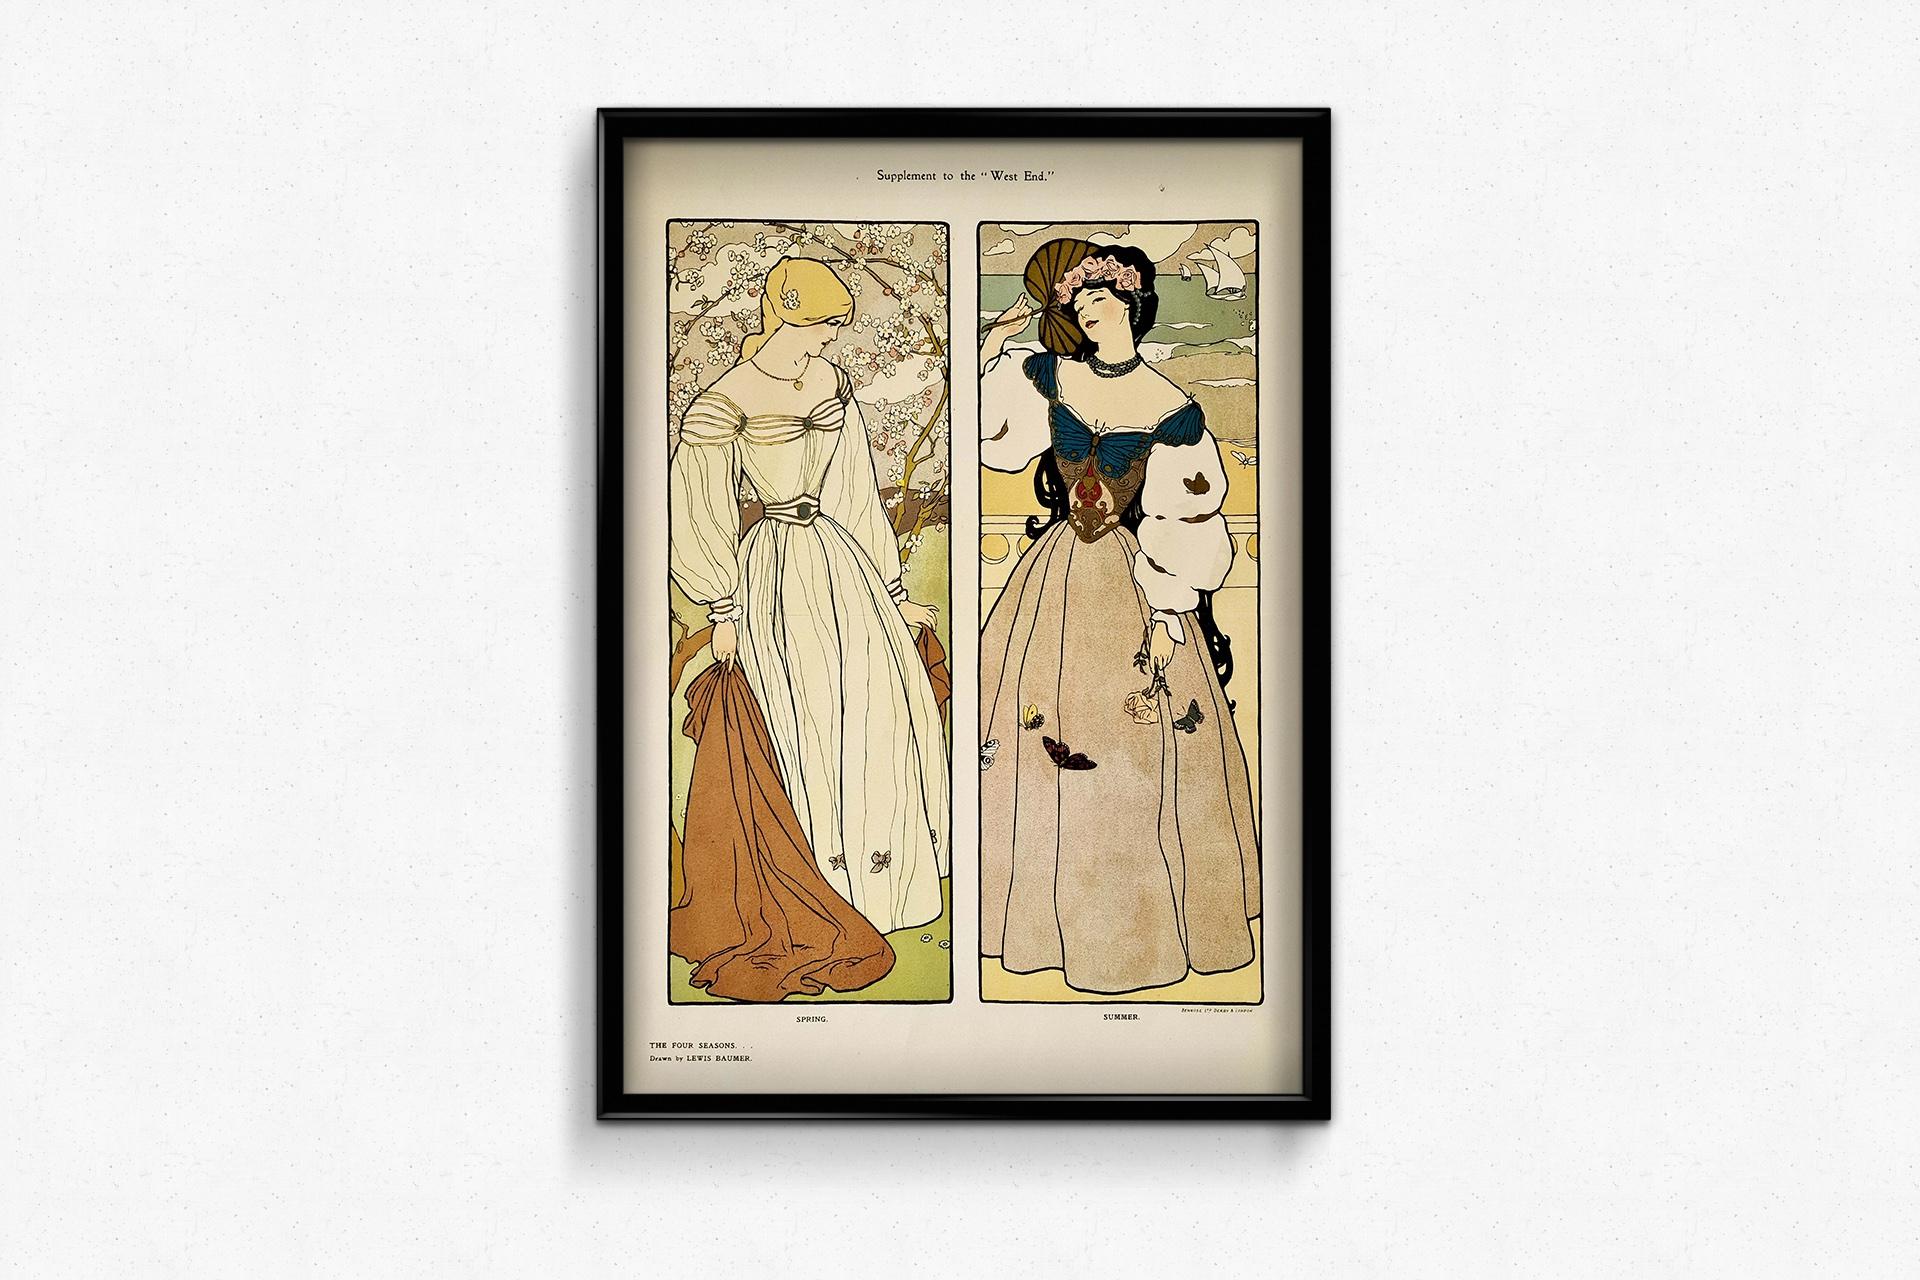 Beautiful art nouveau style poster by Lewis Baumer illustrating the seasons of Spring and Summer

Lewis Christopher Edward Baumer is best known as an English cartoonist who worked for over fifty years for the British magazine Punch, beginning in